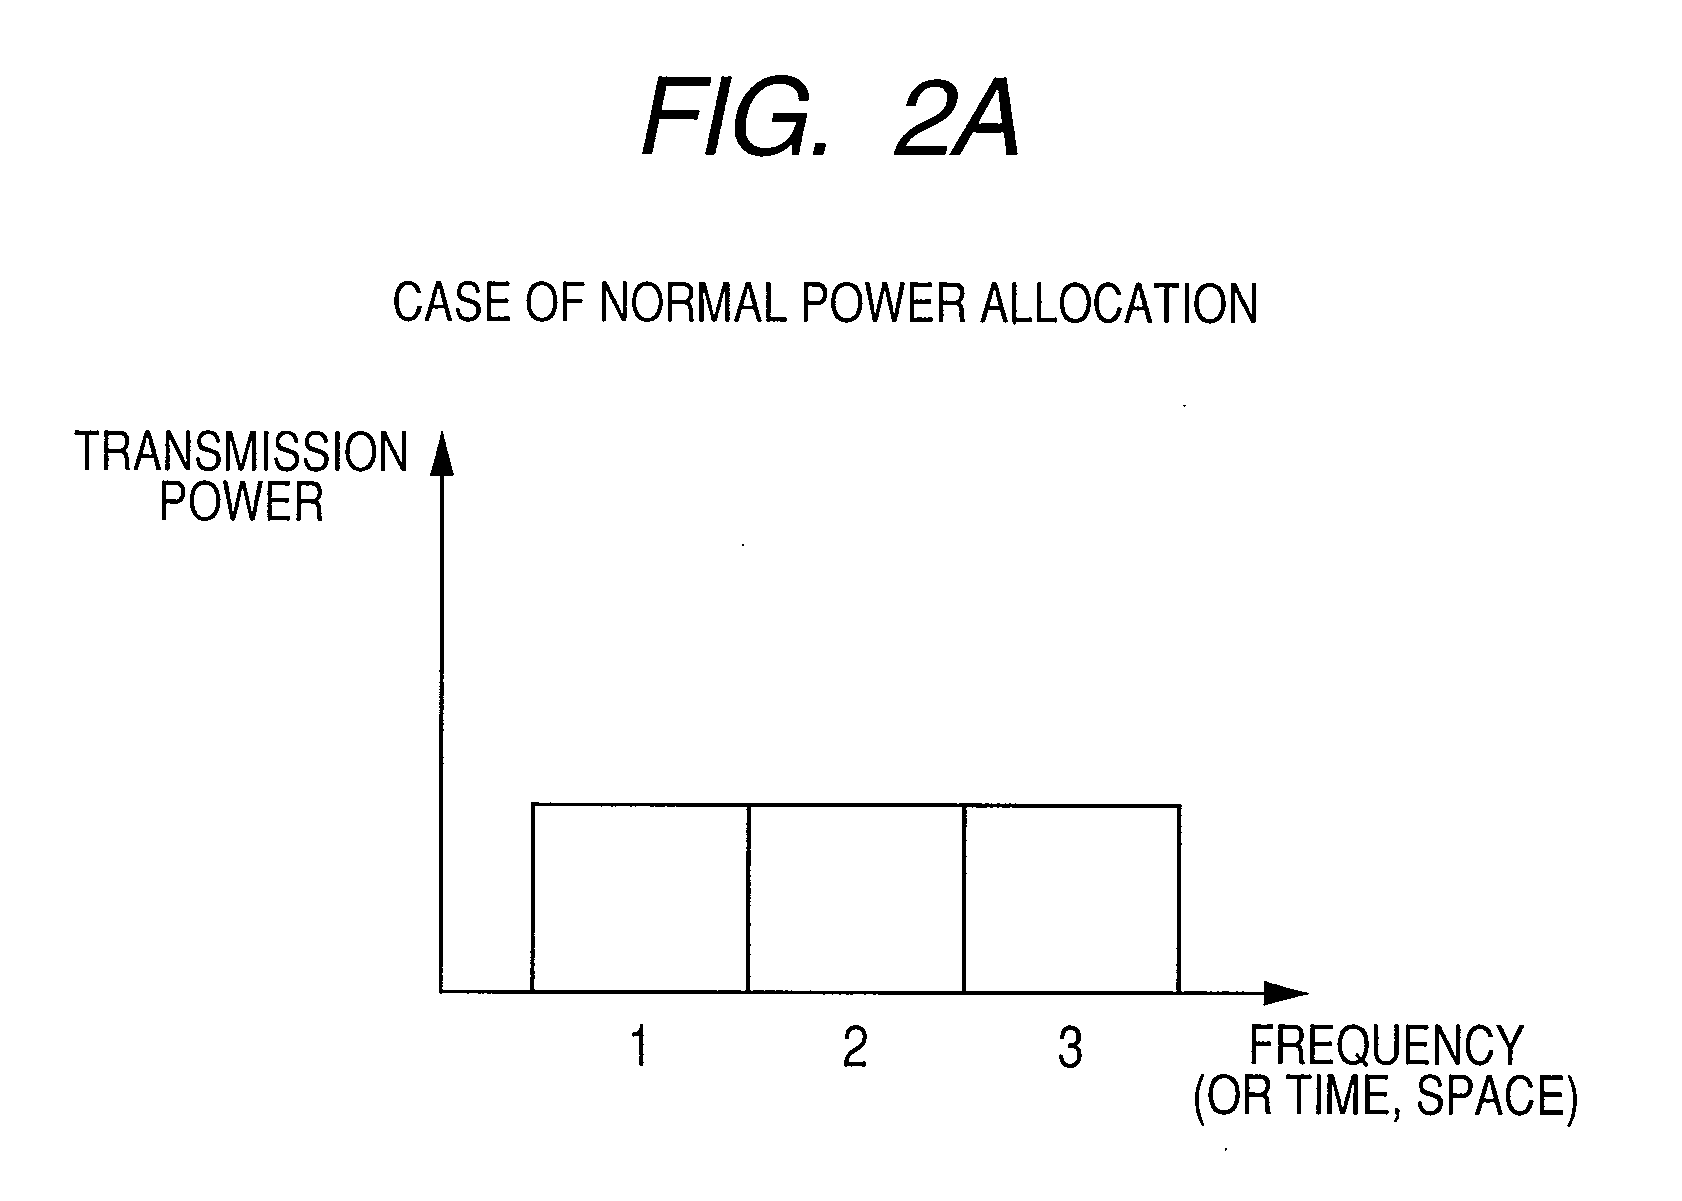 Radio communications system, base station apparatus, gateway apparatus, and remote controller